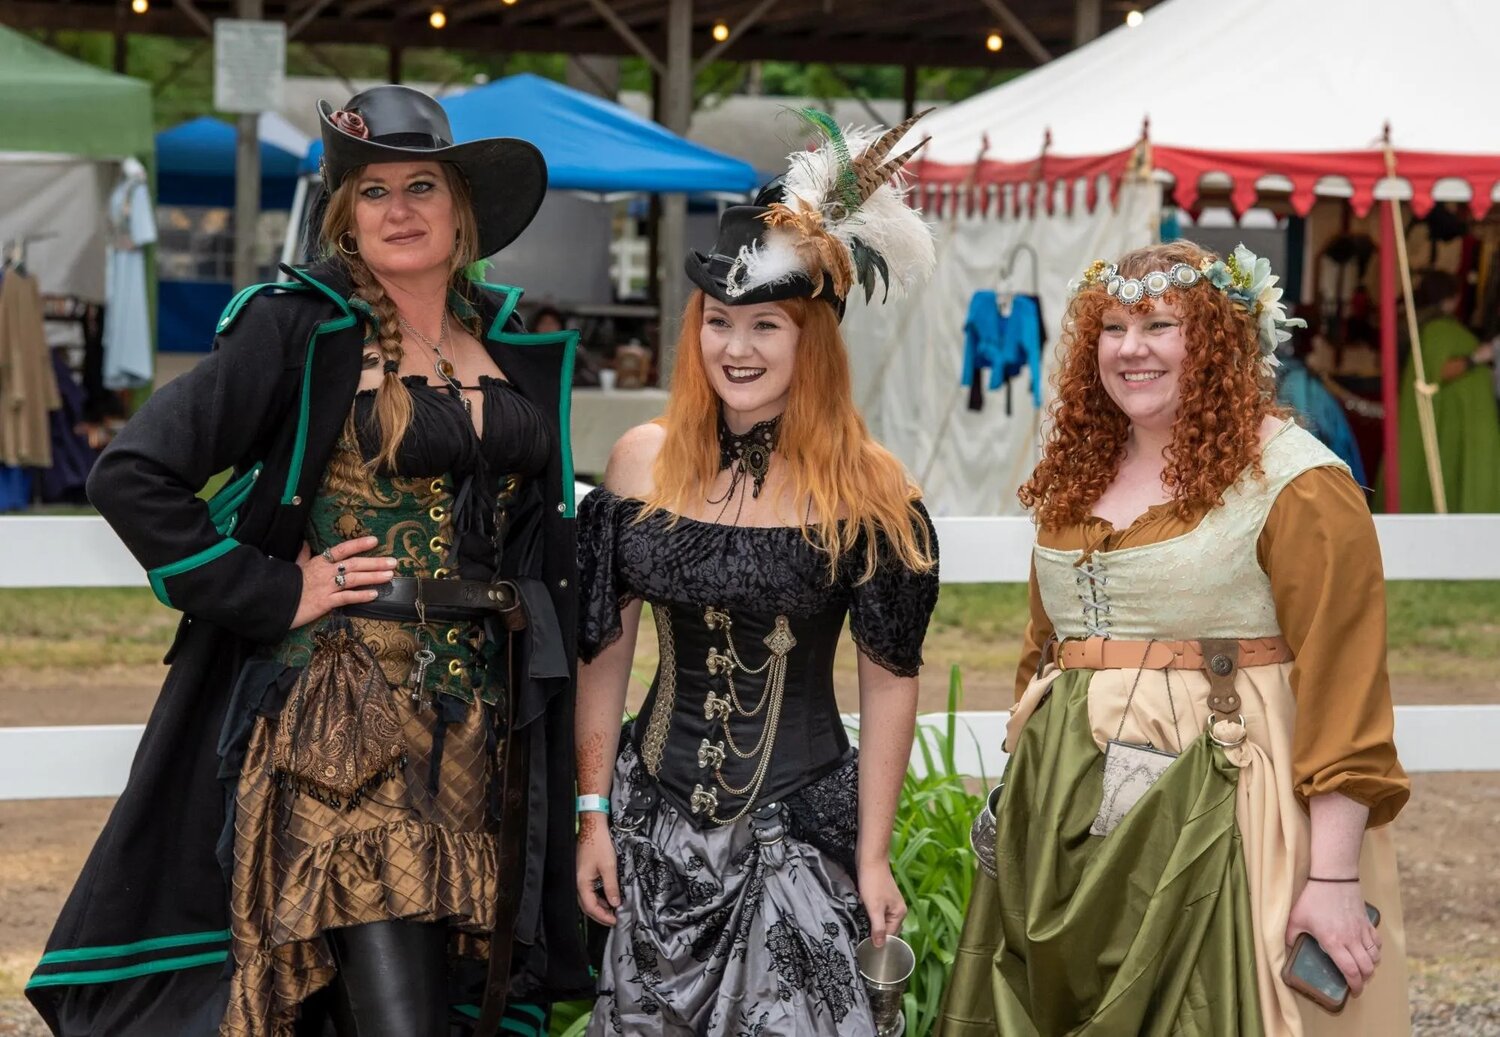 The Magical Realm’s annual Fantasy Faire will feature live jousting, sword fighting, fire spinning, live music, more than 80 vendors, a mead hall and more. Attendees are encouraged to dress up in costumes.